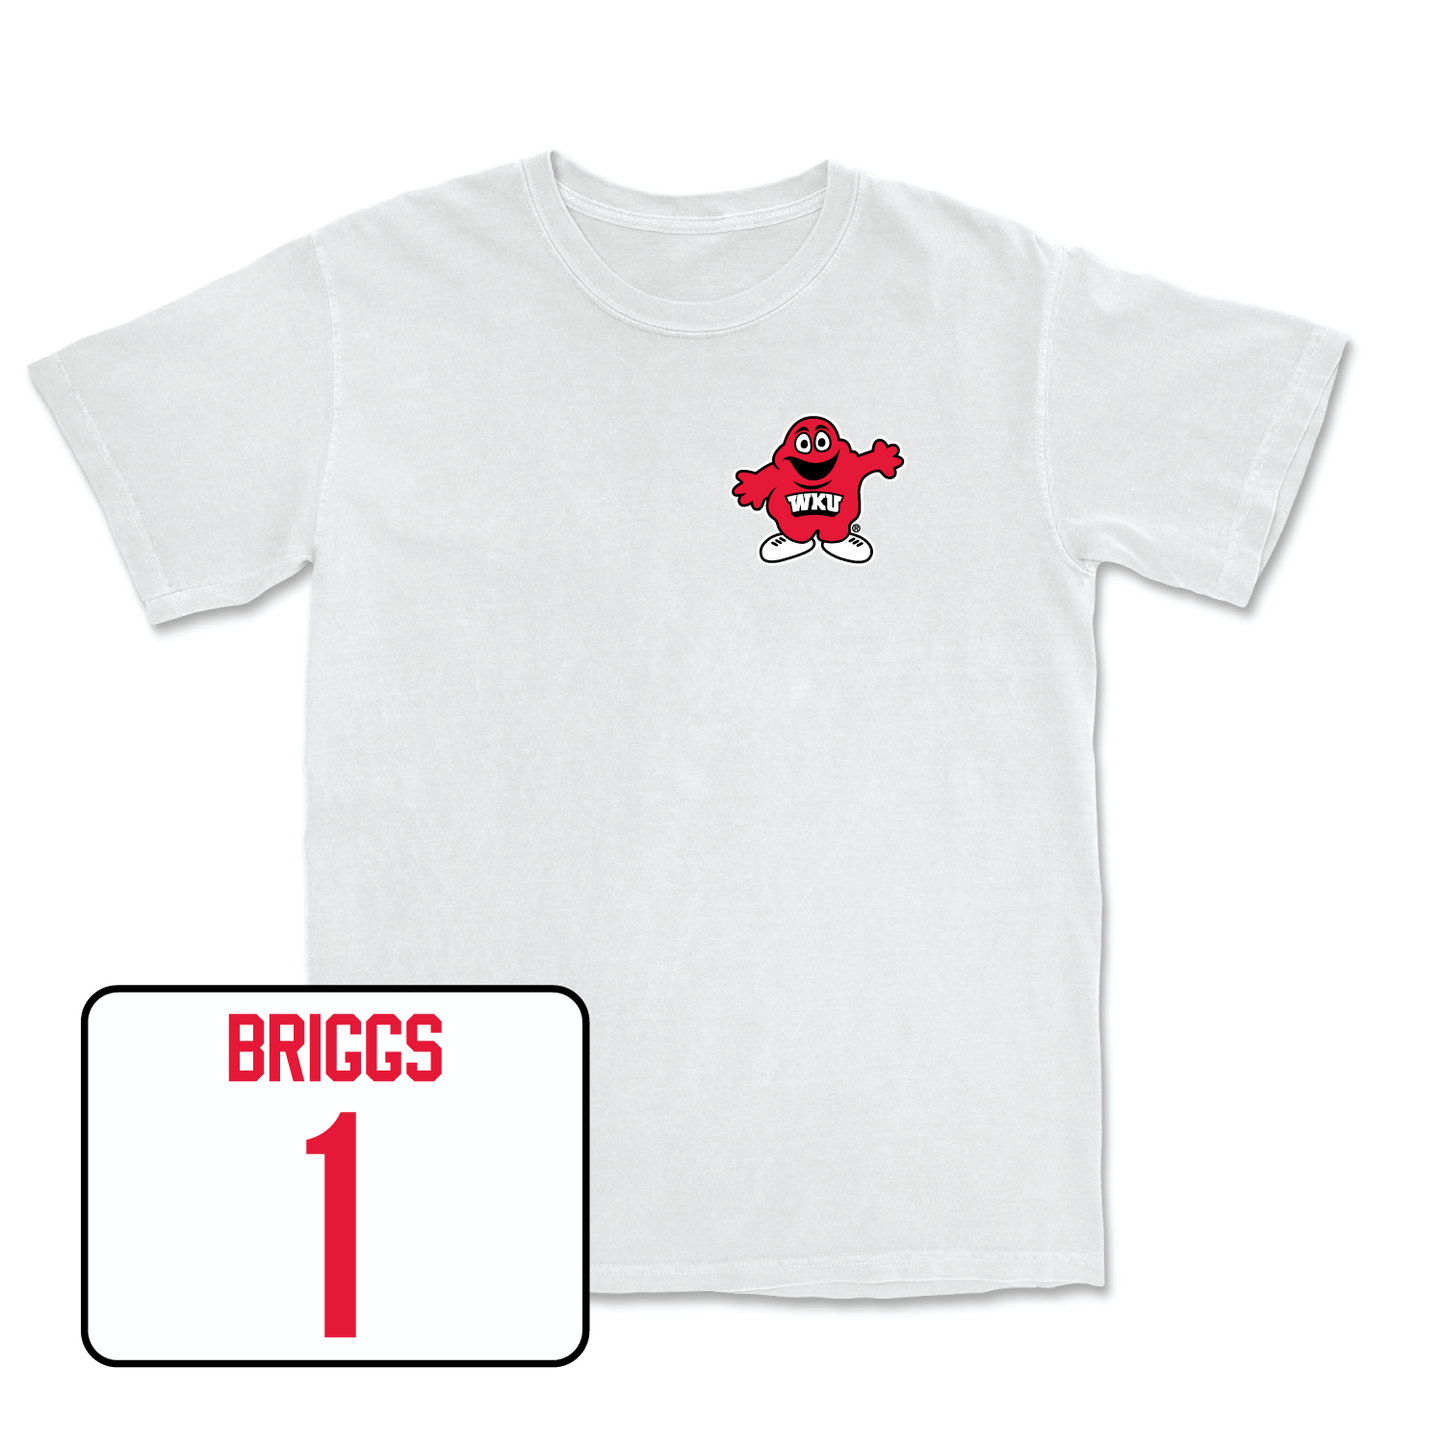 White Women's Volleyball Big Red Comfort Colors Tee 3X-Large / Paige Briggs | #1